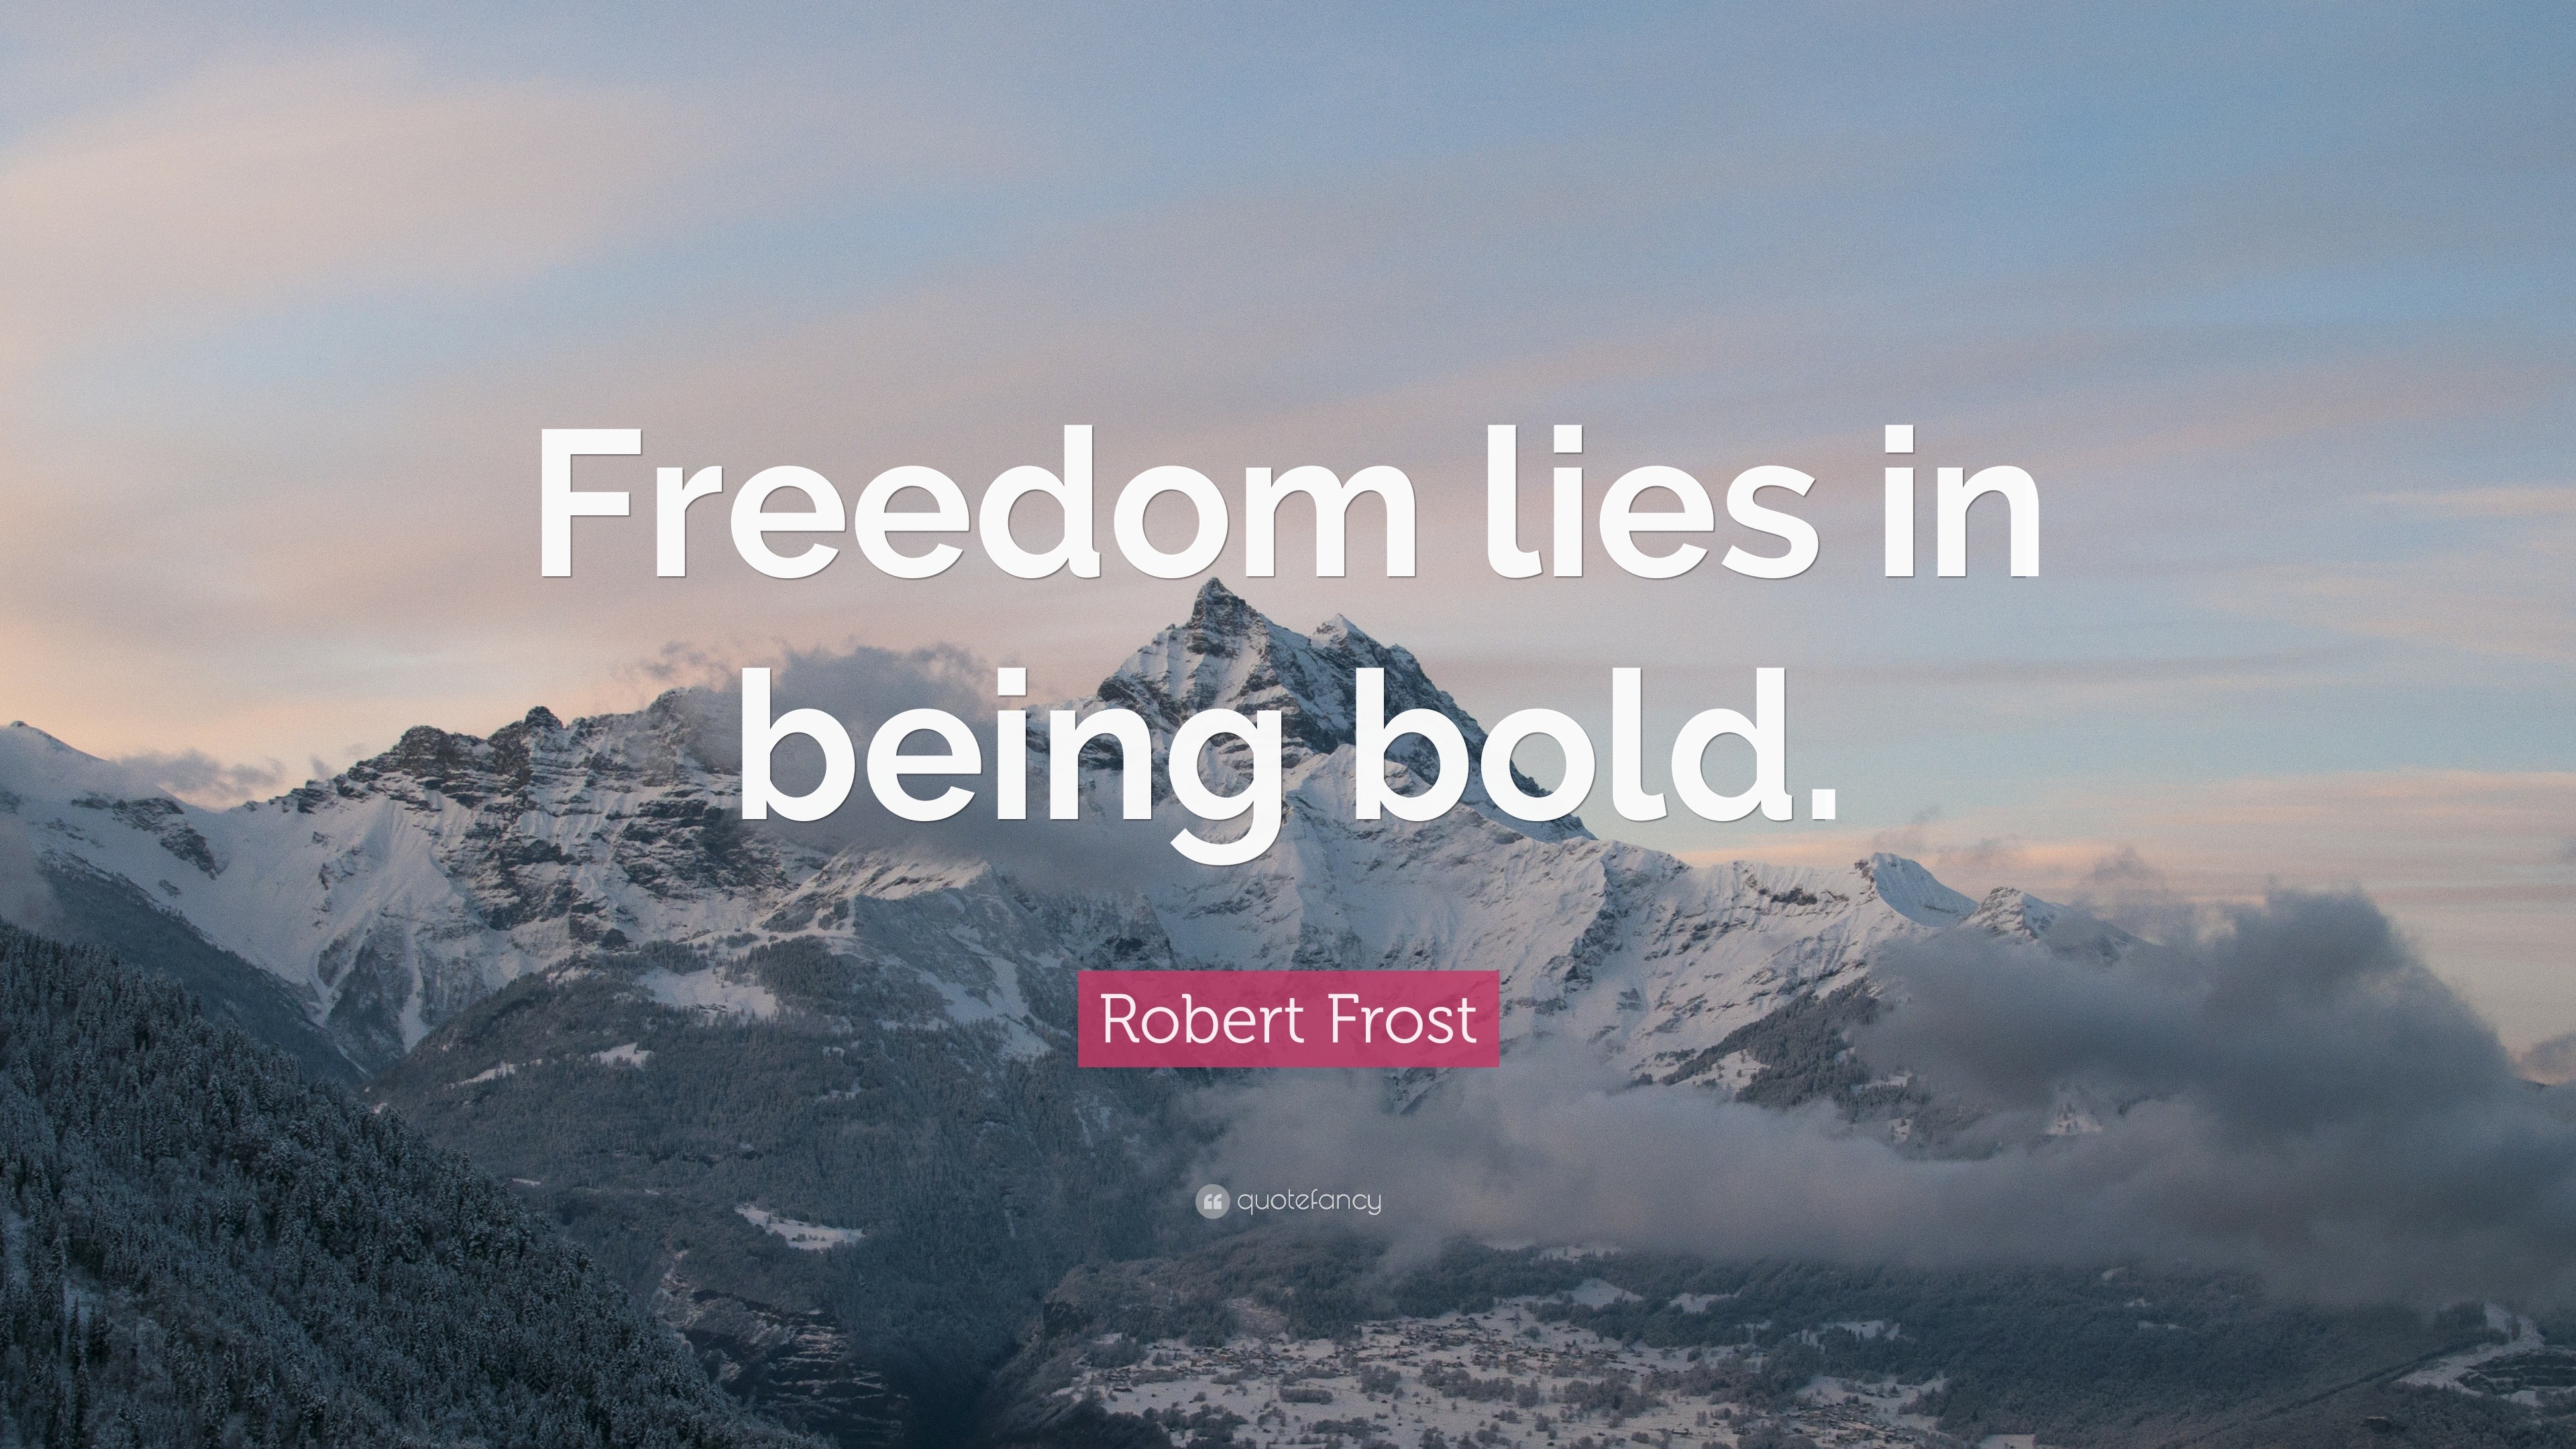 Robert Frost Quote Literary Gift PRINTED Poetry Gift Freedom Lies in Being Bold